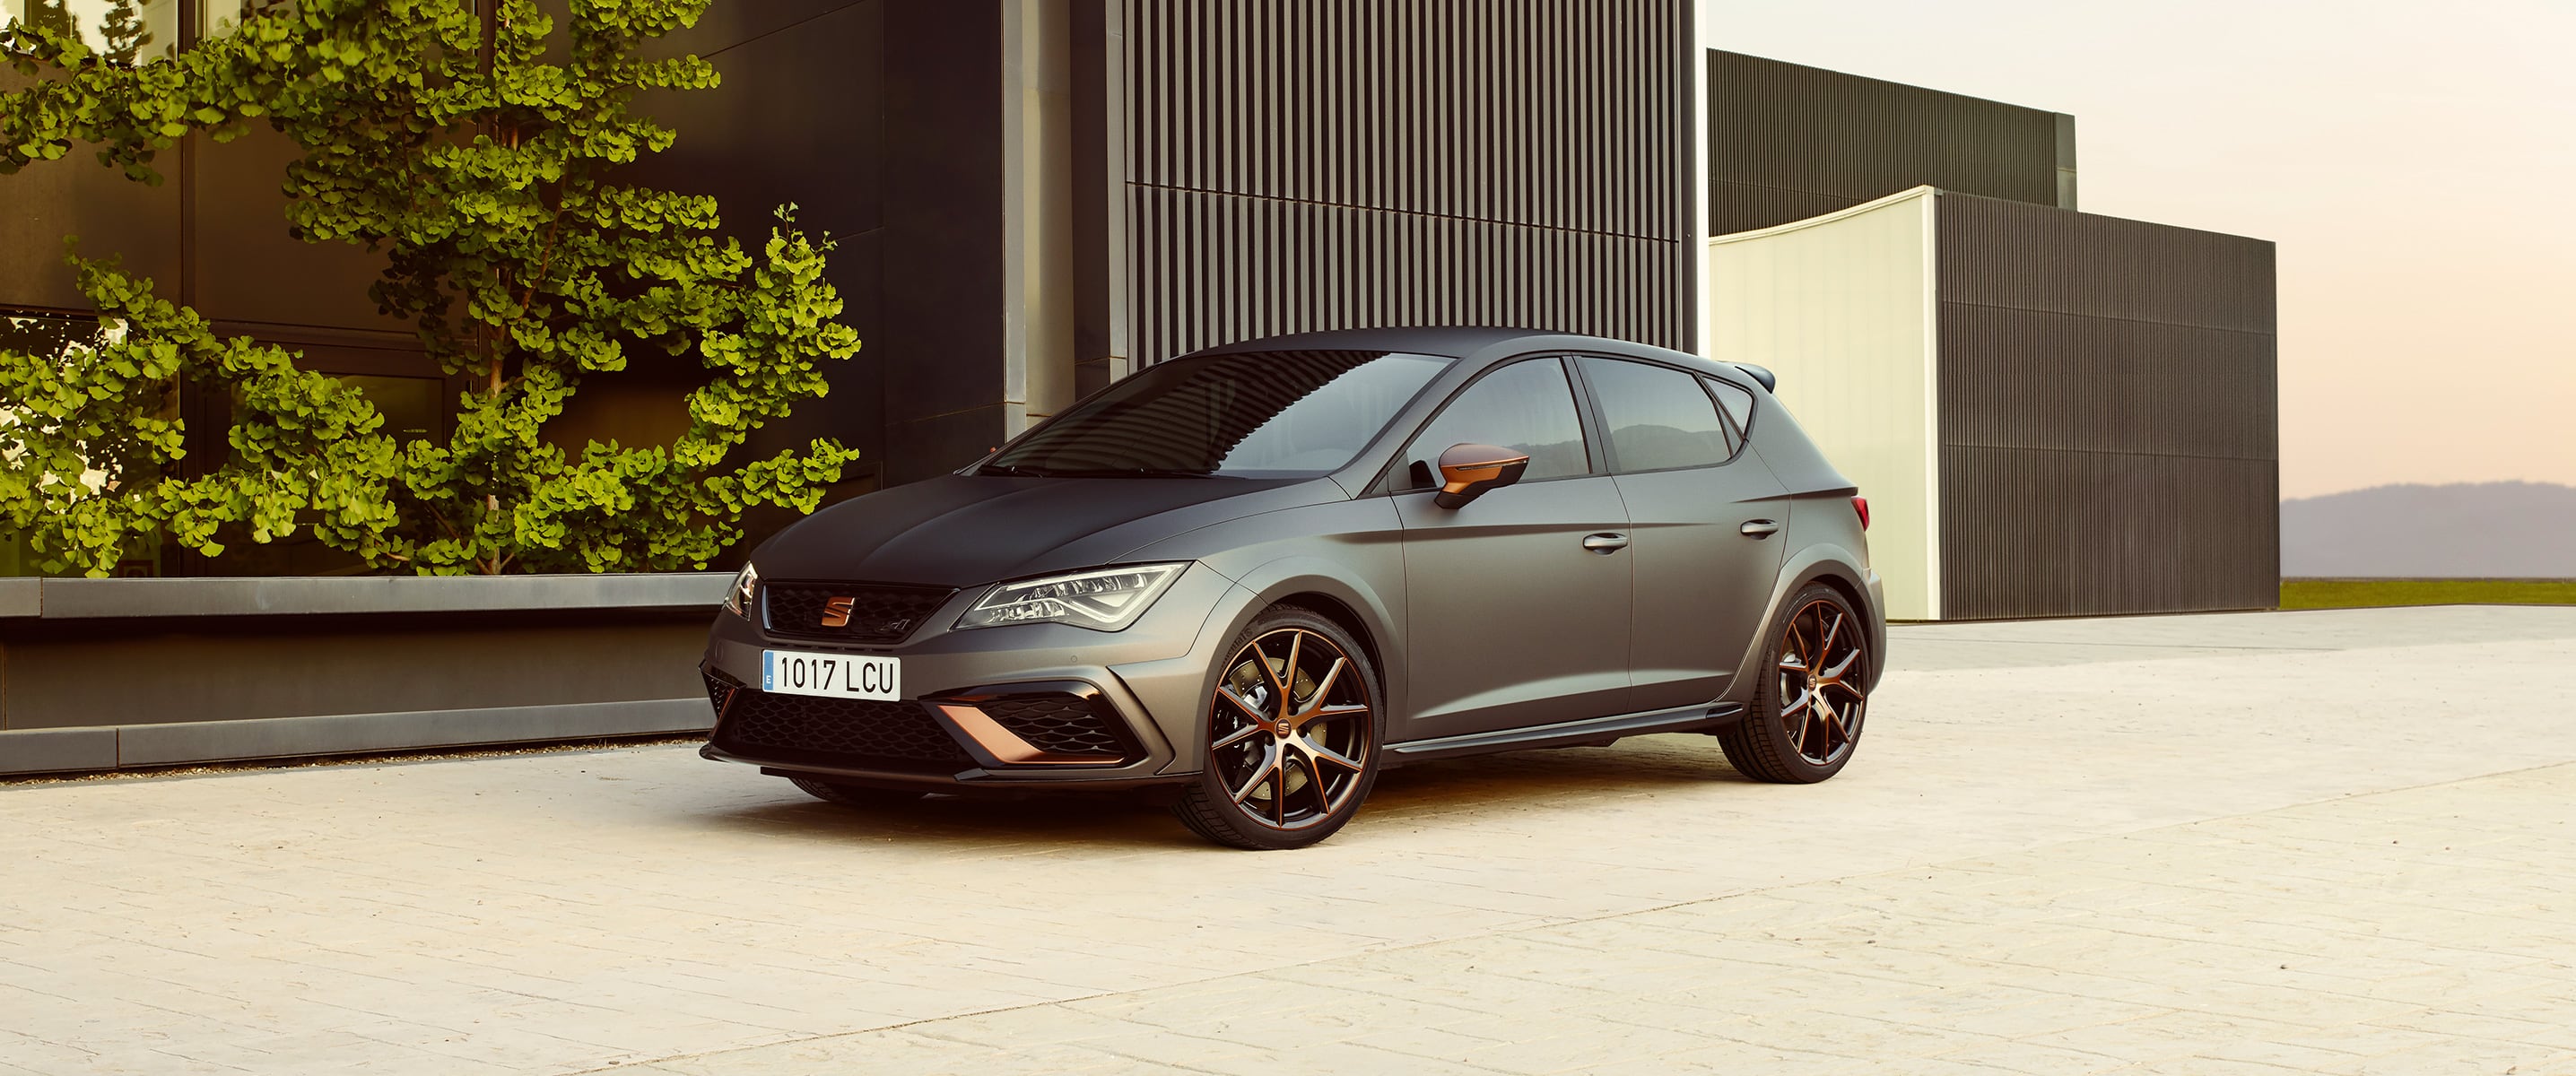 Leon CUPRA R ST car front and side view